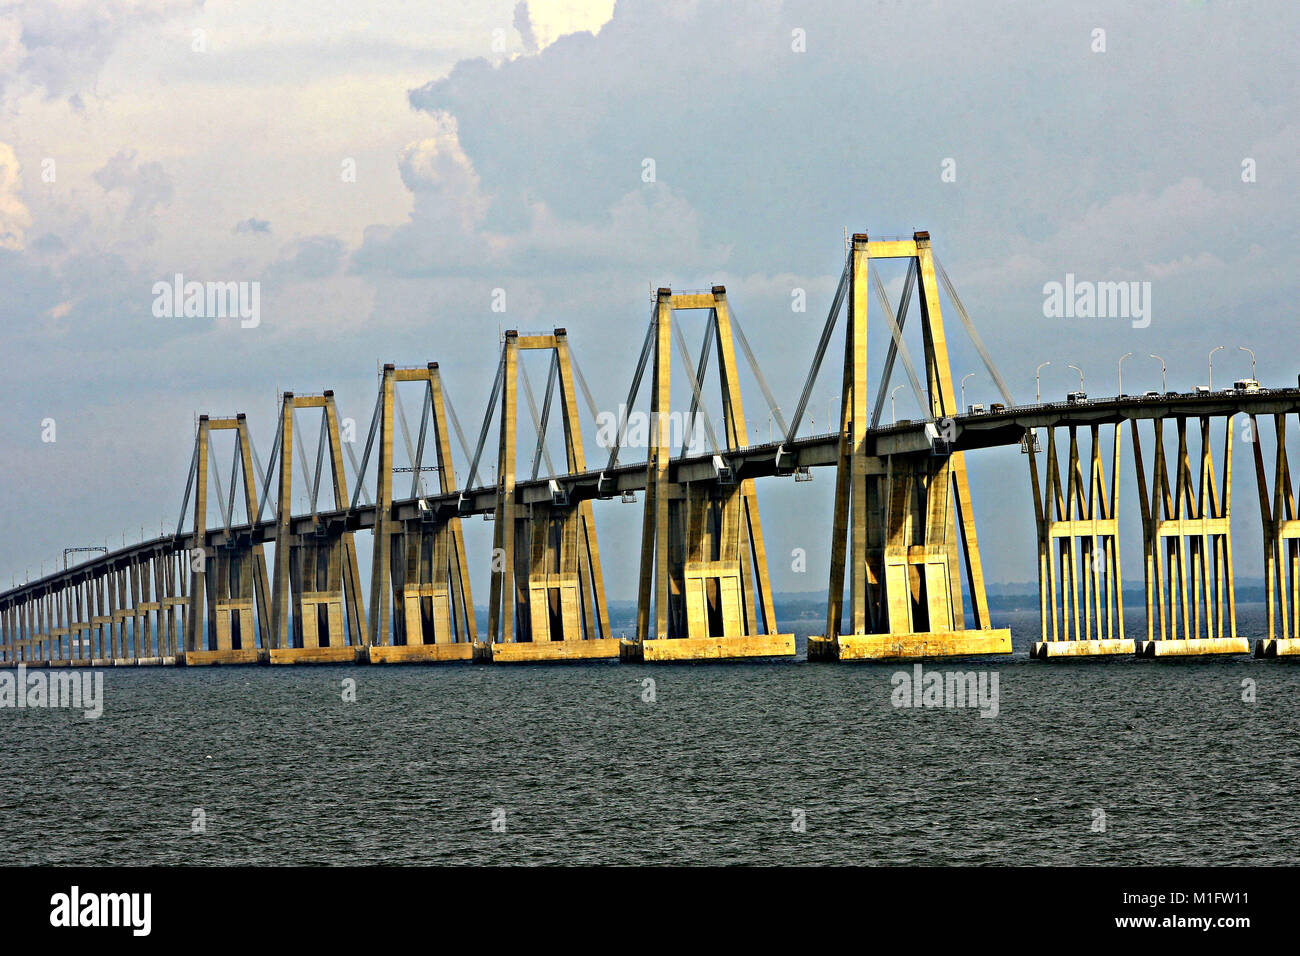 Maracaibo, Zulia, Venezuela. 27th Oct, 2010. October 27, 2010. The ''General Rafael Urdaneta'' bridge, also known as the ''bridge over the lake of Maracaibo'', was built in reinforced and prestressed concrete, and has a length of 8678 m and 134 pillars. It is one of the largest in the world in its kind, the second longest in Latin America, only after the Rio-Niter''”i Bridge in Brazil was inaugurated by President R''”mulo Betancourt, on August 24, 1962, after 4 years of construction. In Maracaibo, Zulia state. Photo: Juan Carlos Hernandez (Credit Image: © Juan Carlos Hernandez via ZUMA Wir Stock Photo